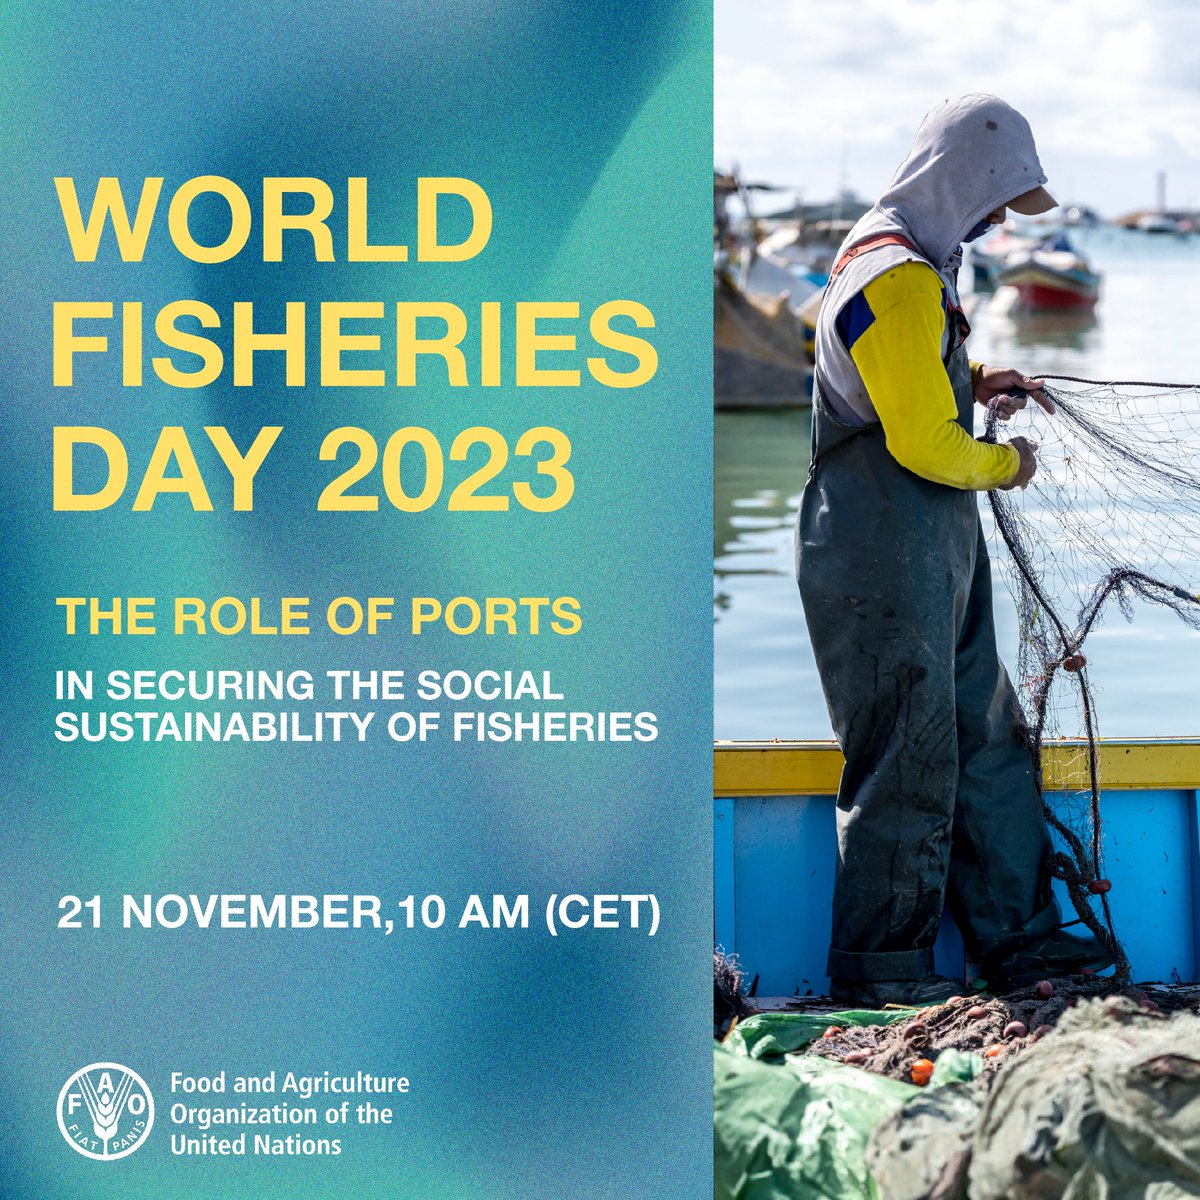 Tomorrow is #WorldFisheriesDay ❗️ Dive into an insightful event with @FAOFish & the @HolySee_FAO, exploring the vital role of #ports in ensuring the social sustainability of #fisheries. How can ports shape a sustainable future ❓ Join the discussion👉 bit.ly/3G4vPlQ